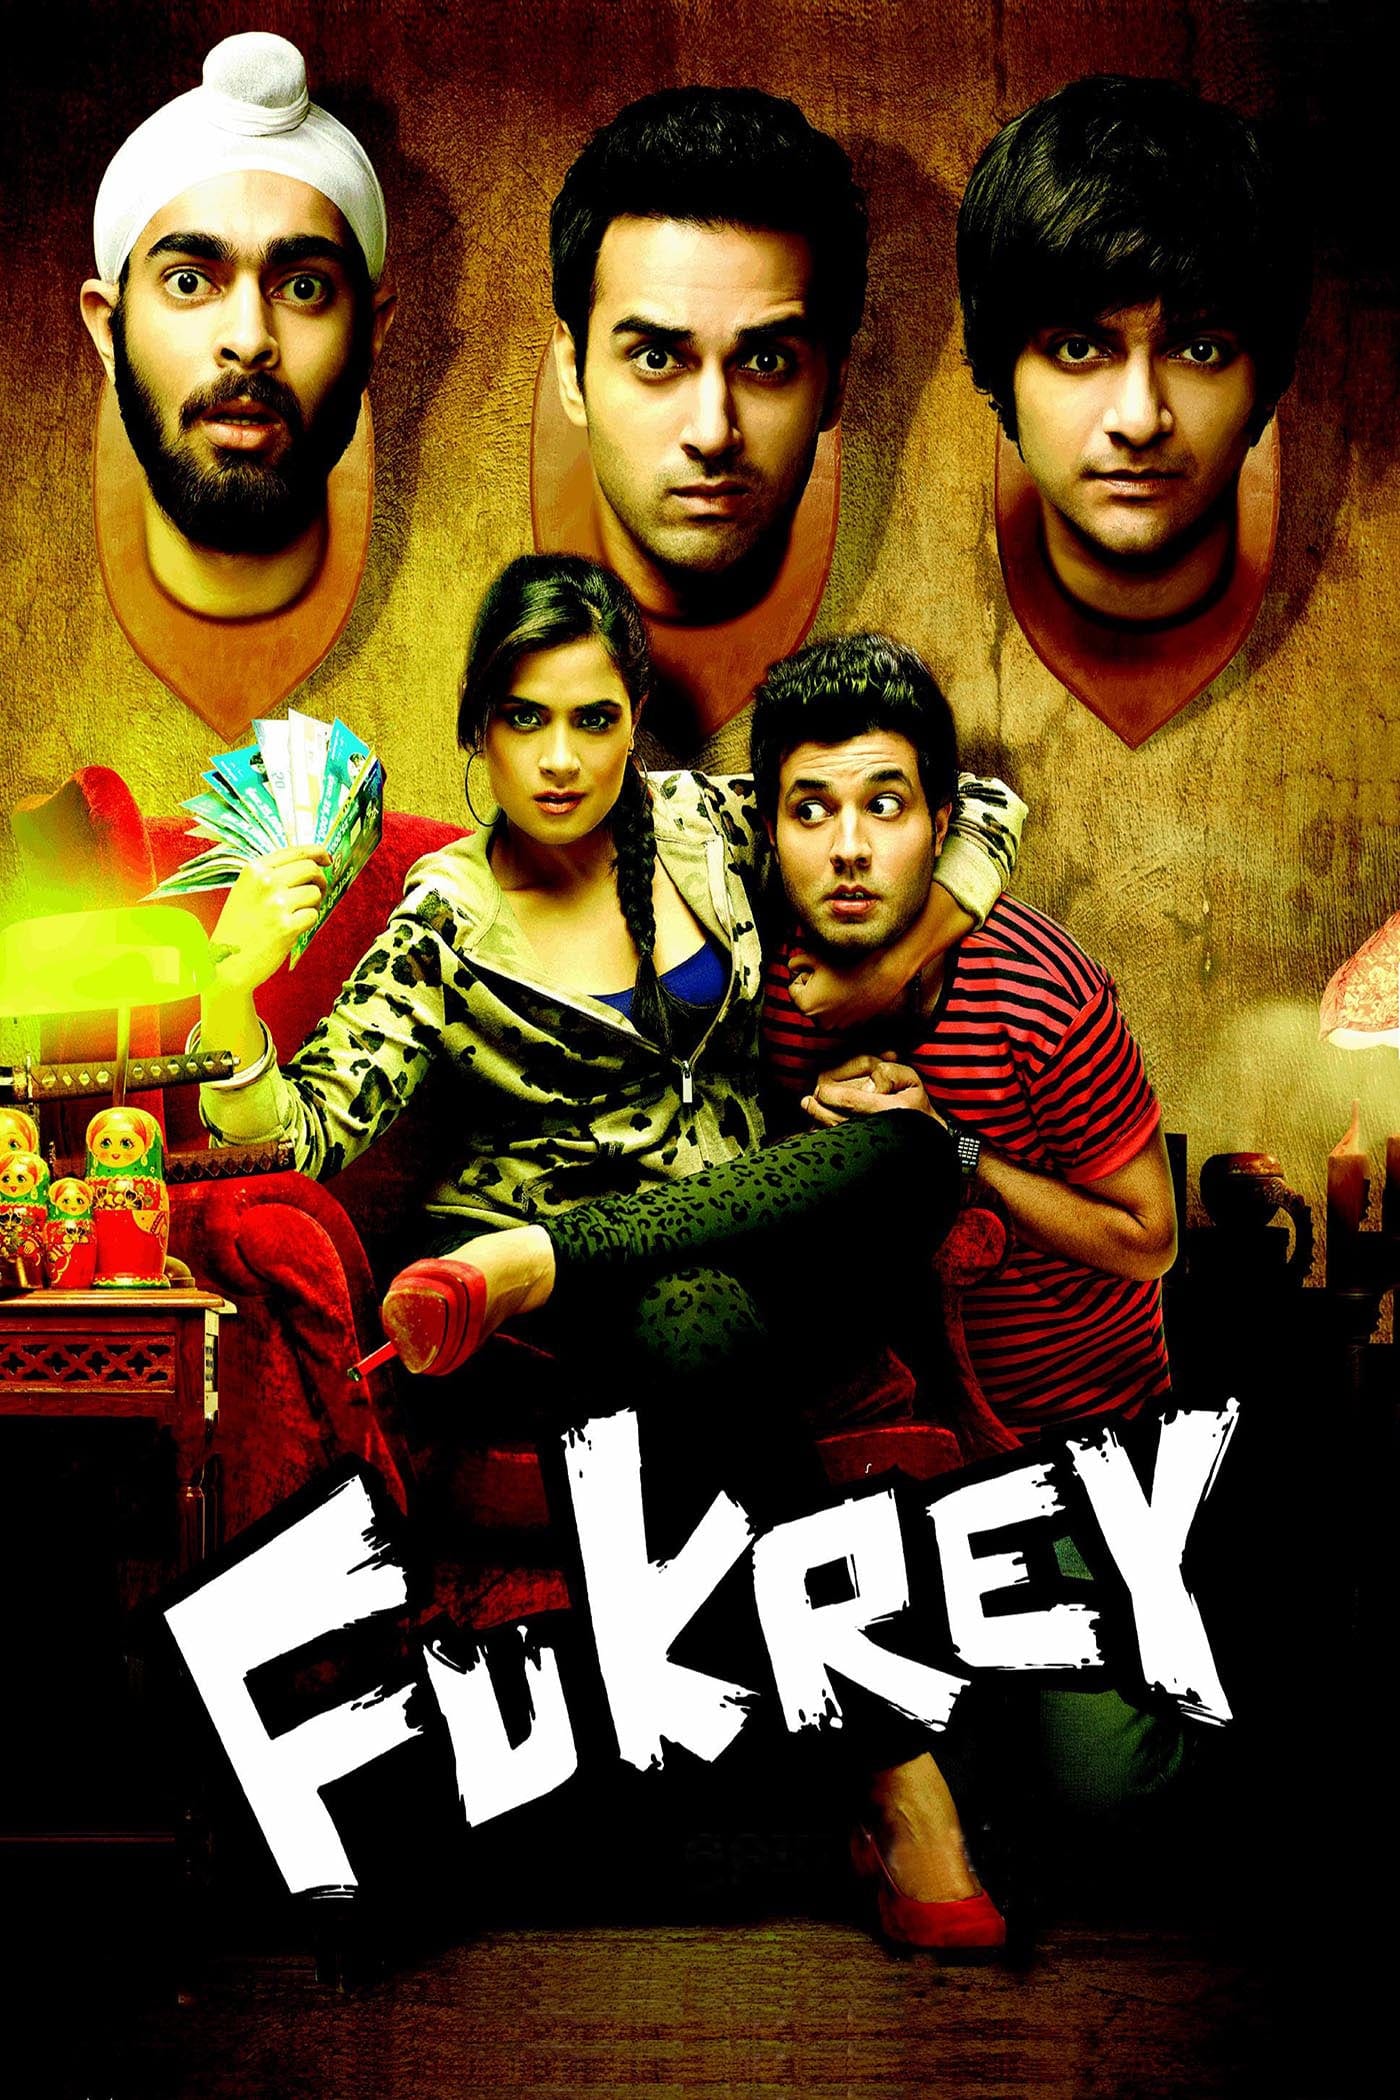 Poster for the movie "Fukrey"